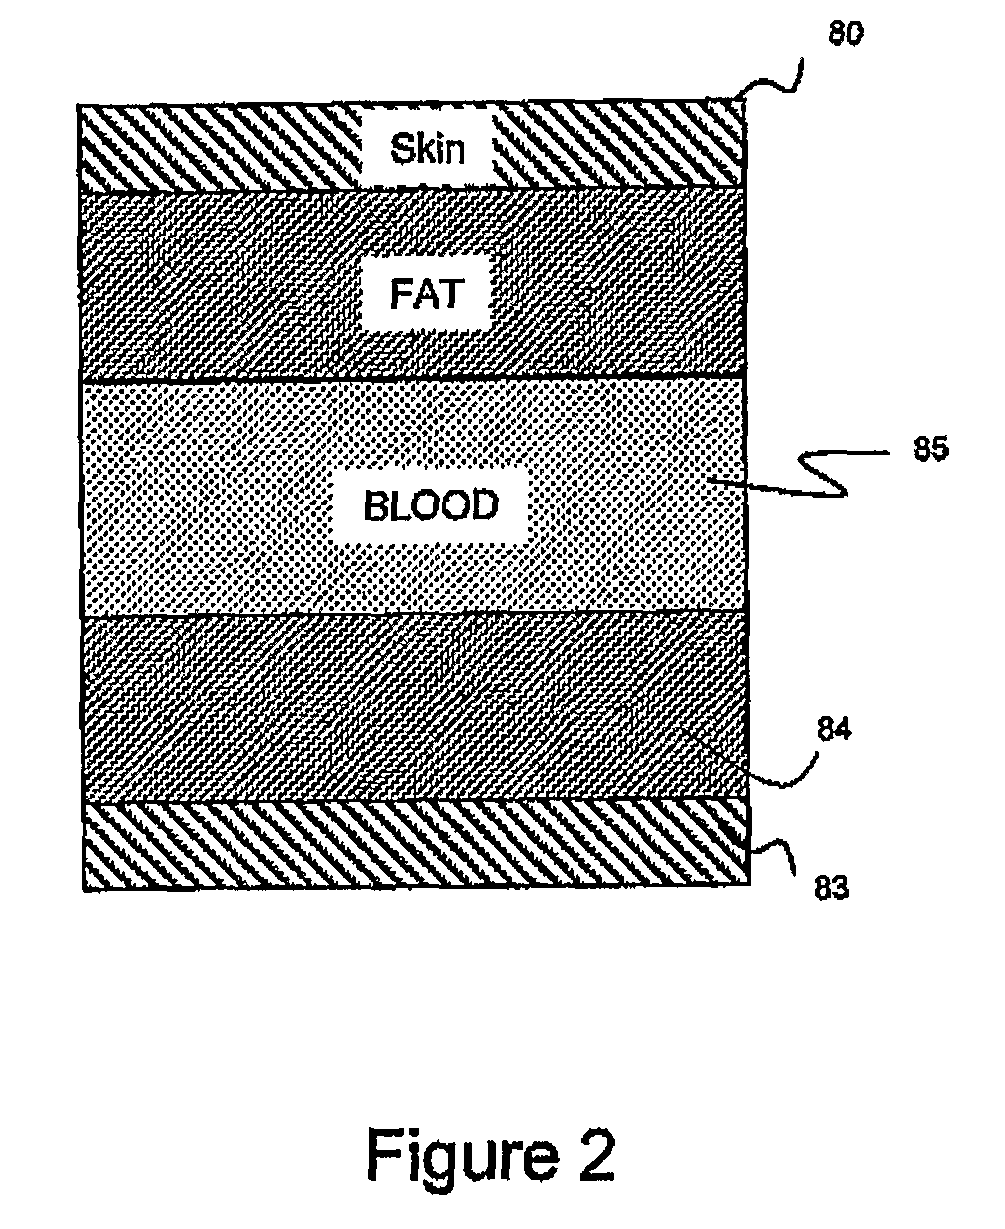 Apparatus and Method for Measuring Constituent Concentrations within a Biological Tissue Structure